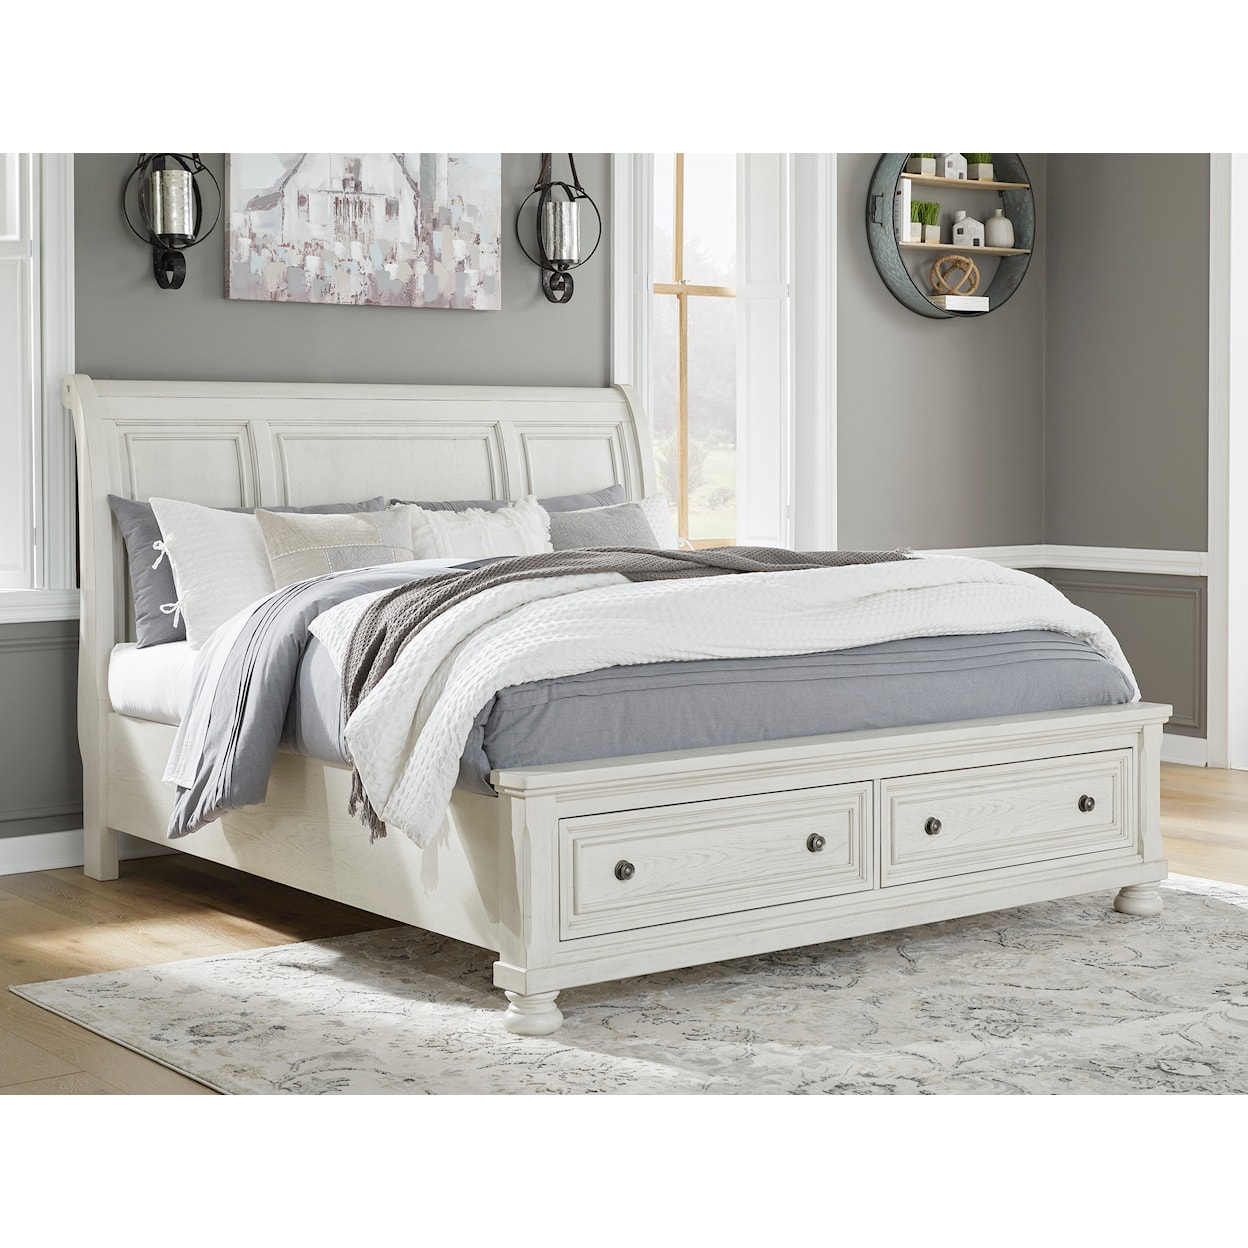 Ashley Furniture Signature Design Robbinsdale California King Sleigh Bed with Storage